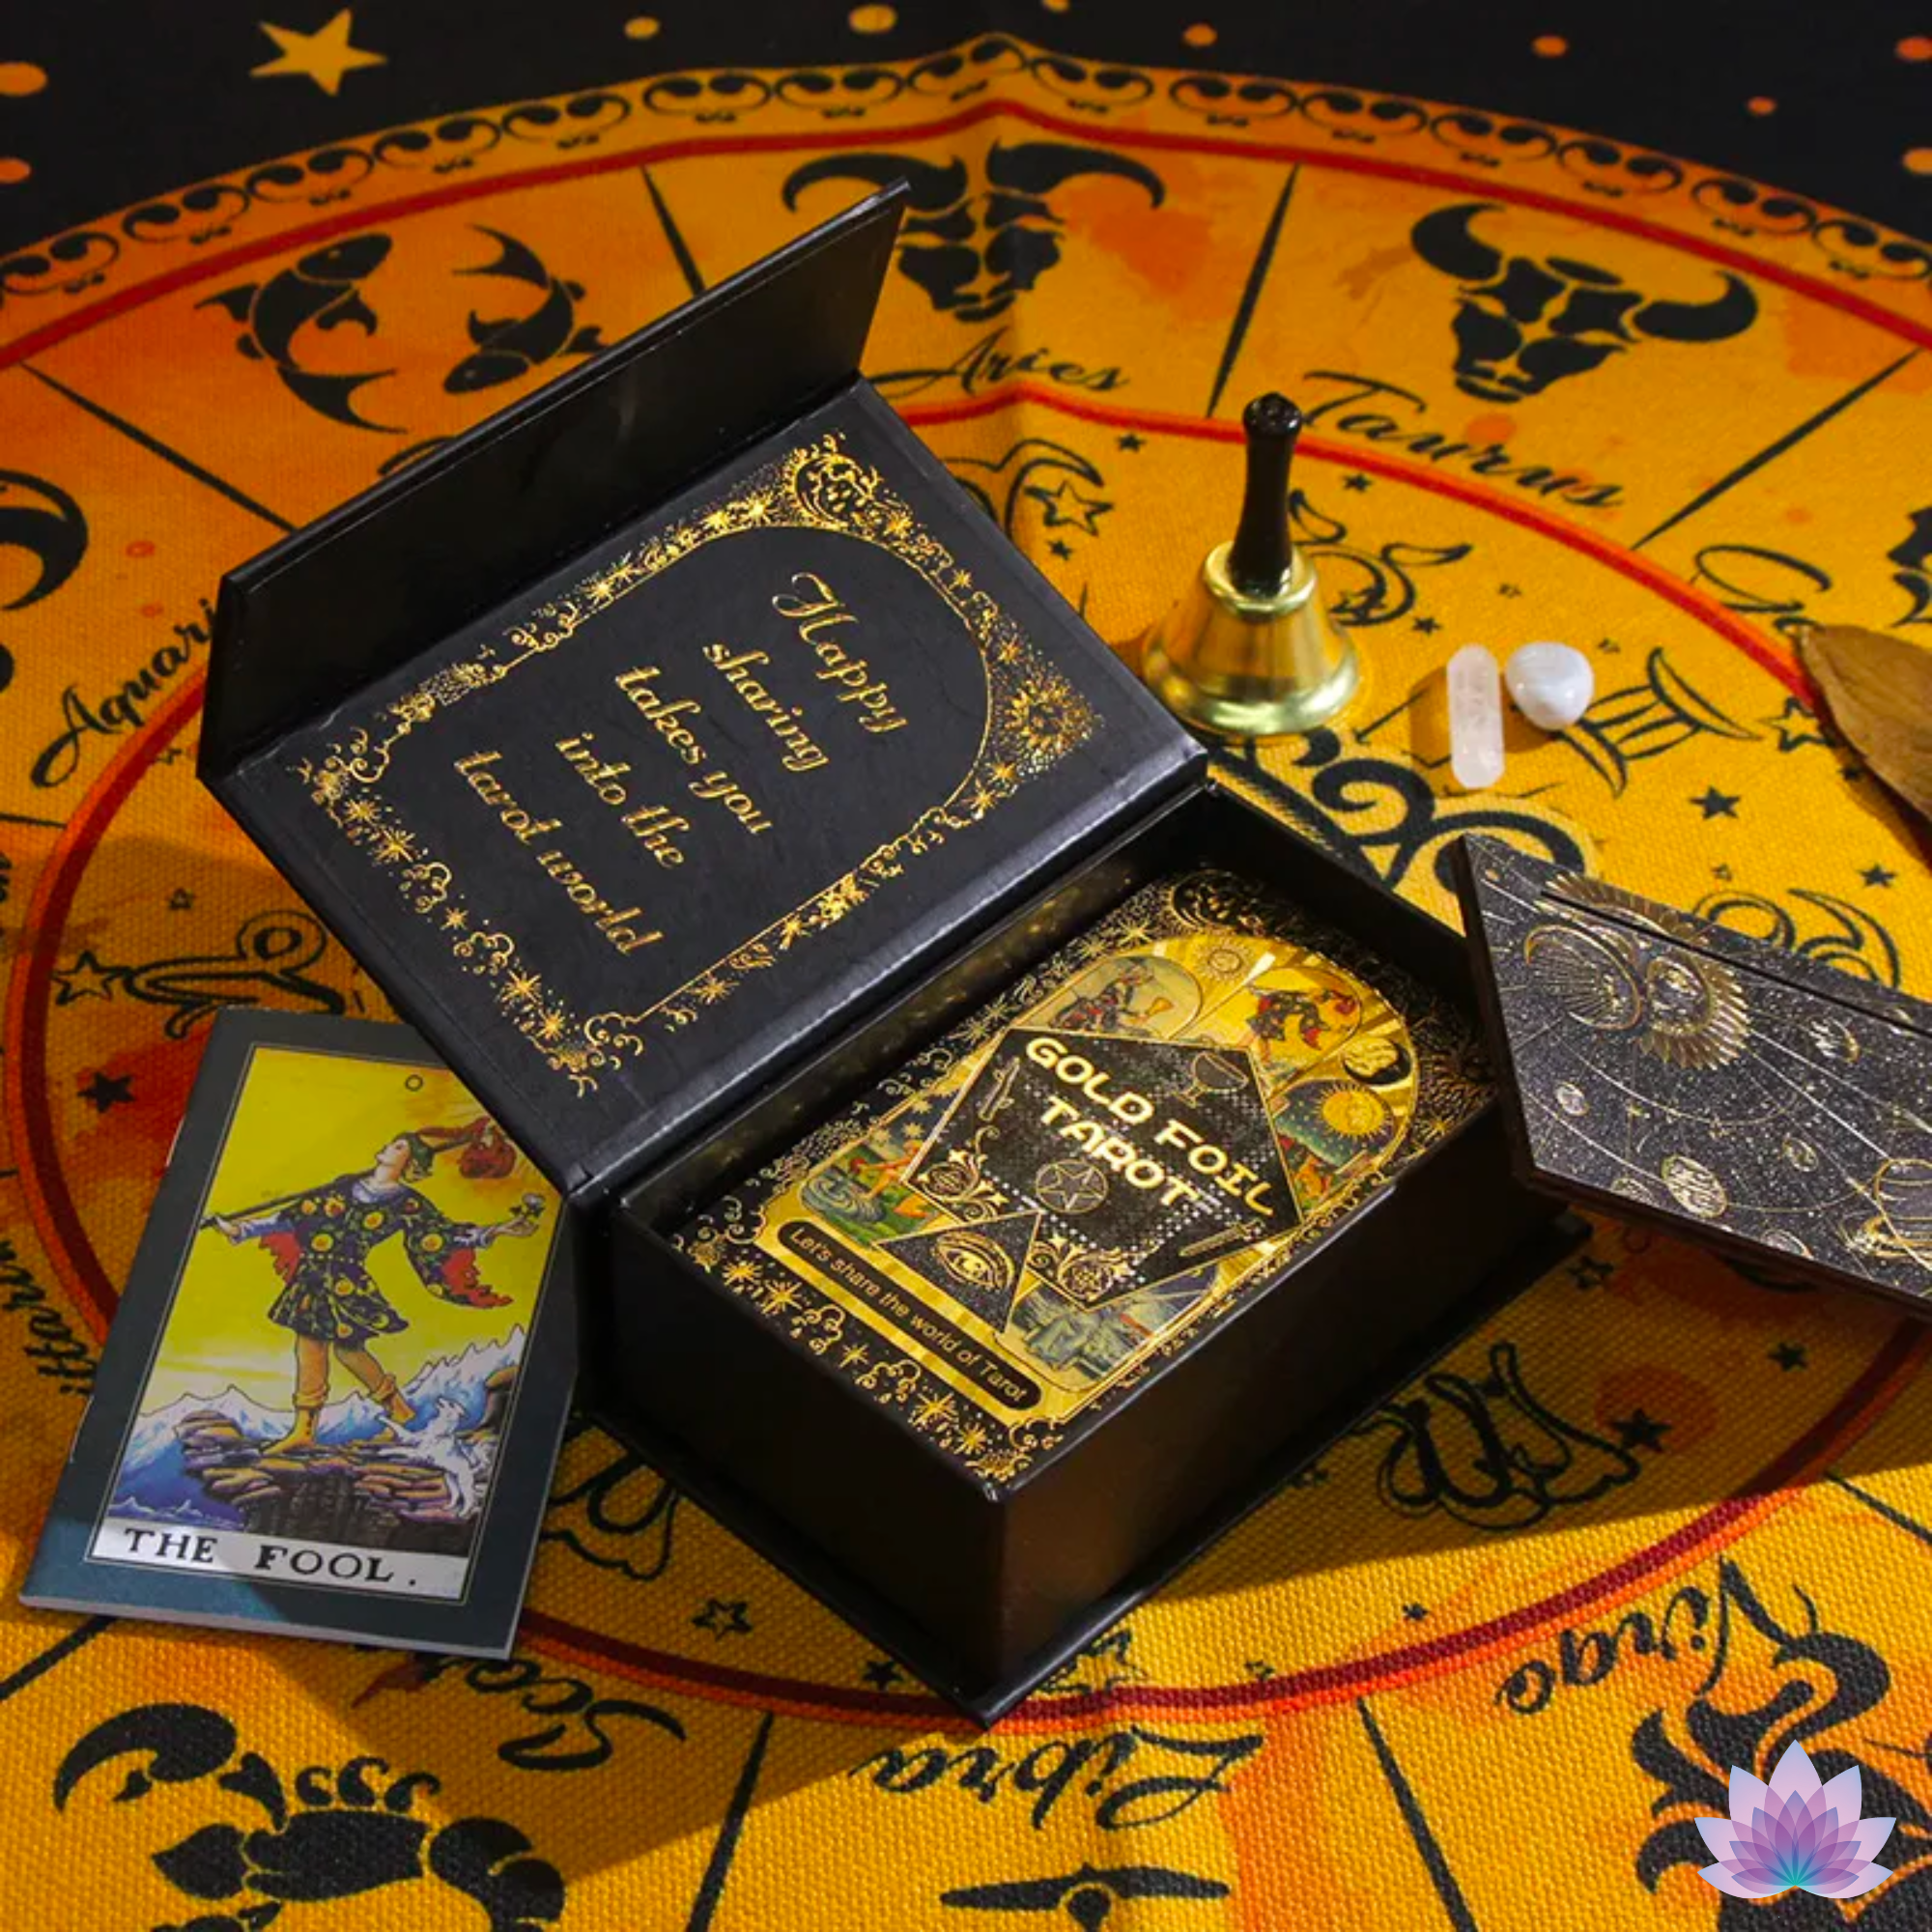 Gold Foil Tarot Deck On A Luxury Box With Wooden Card Stand And Guidebook For Beginner Divination Witch • Traditional Waite Premium Colored PVC Cards With Black Background And Gold Lines • Apollo Tarot Shop